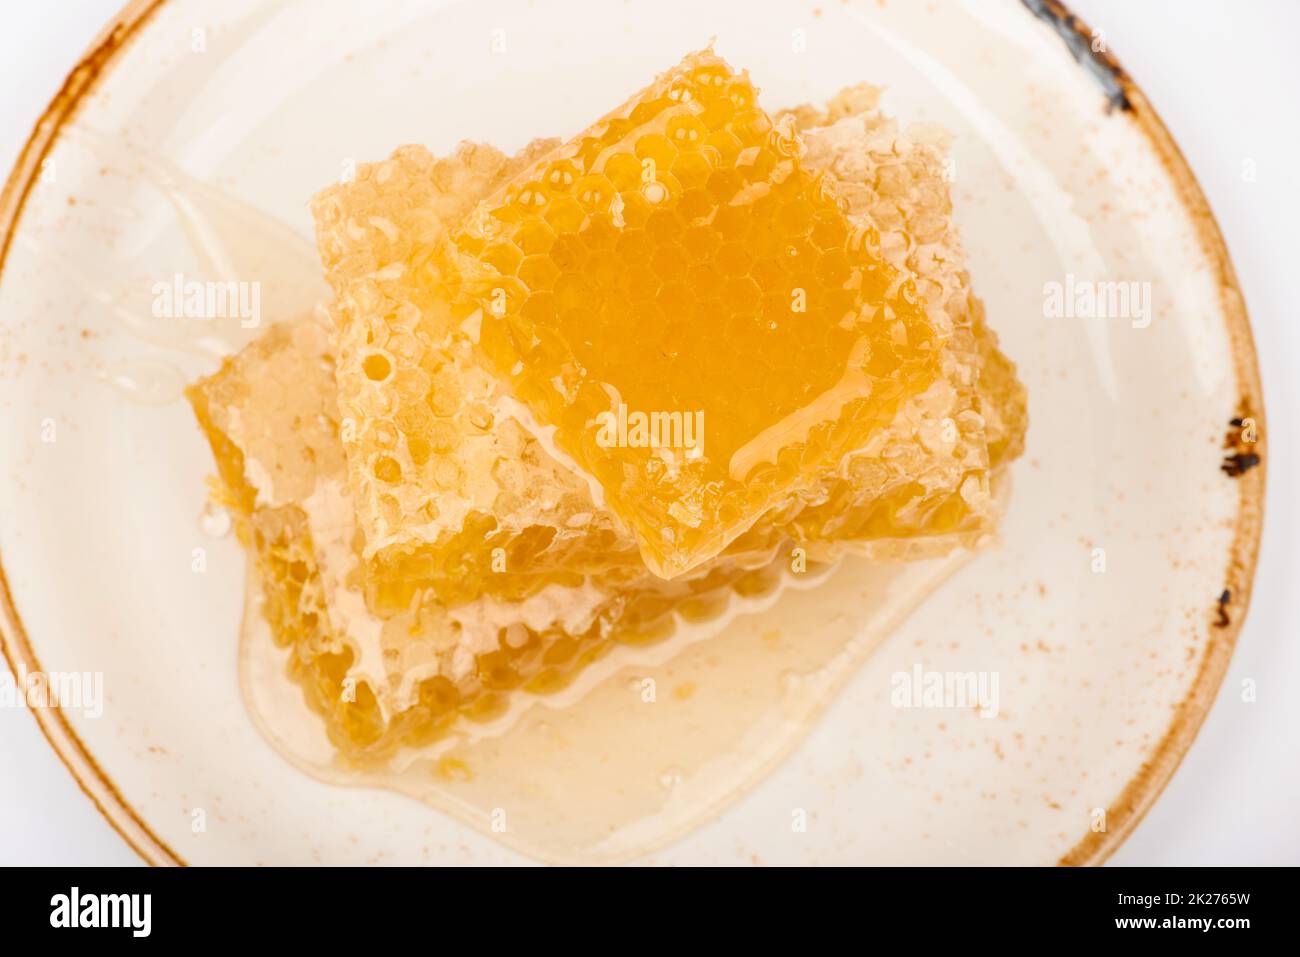 Close up stack of several fresh cut golden comb honey slices on plate isolated on white background, elevated top view, directly above Stock Photo